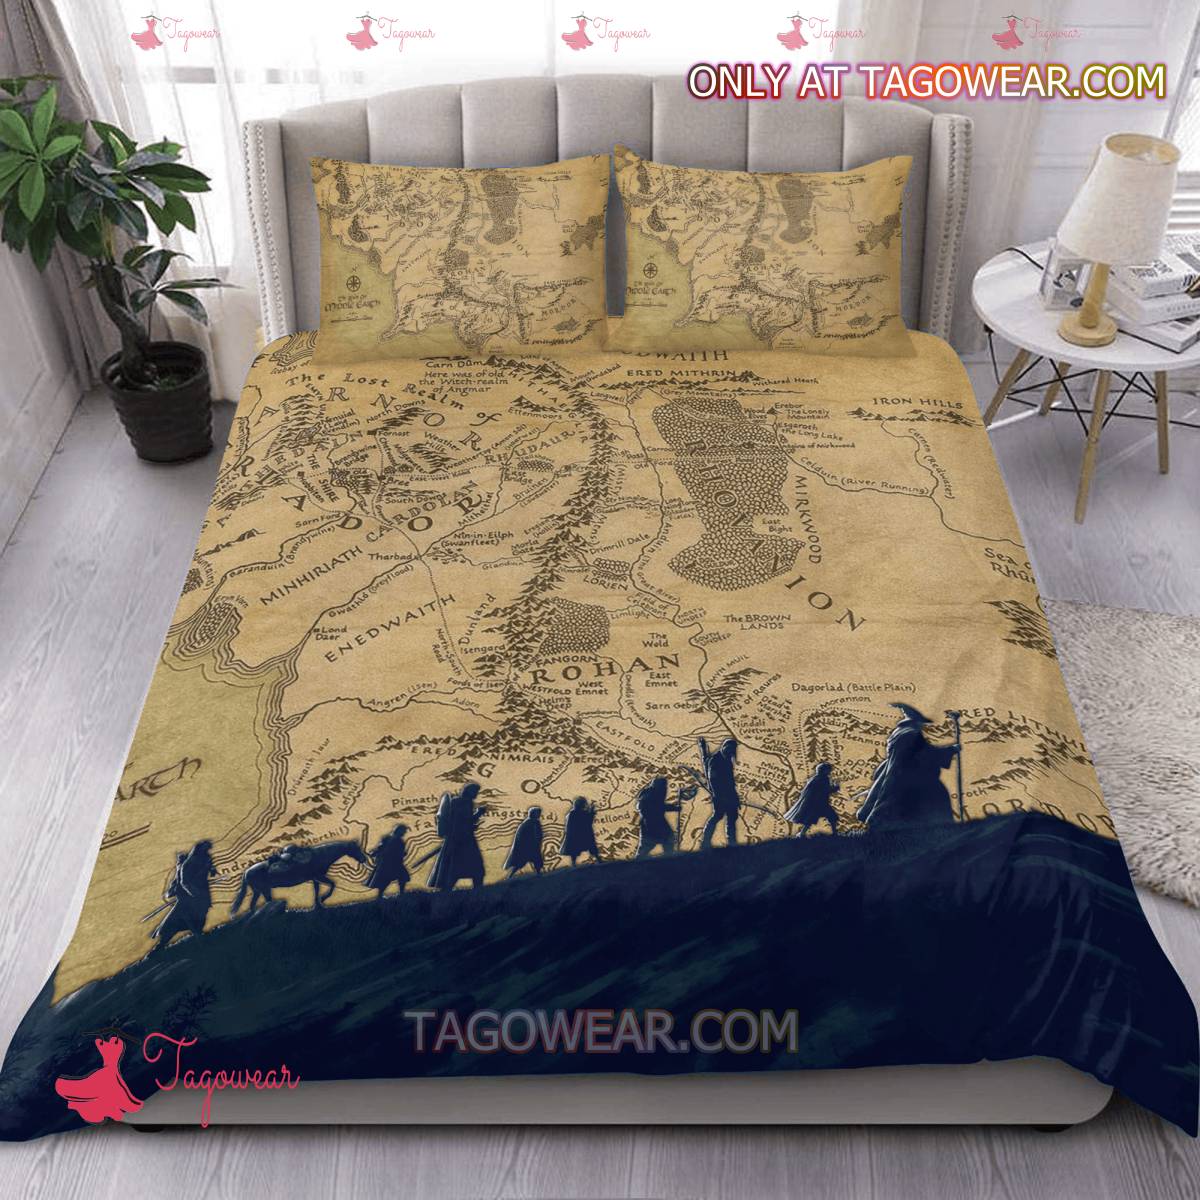 The Lord Of The Rings Map Bedding Set a